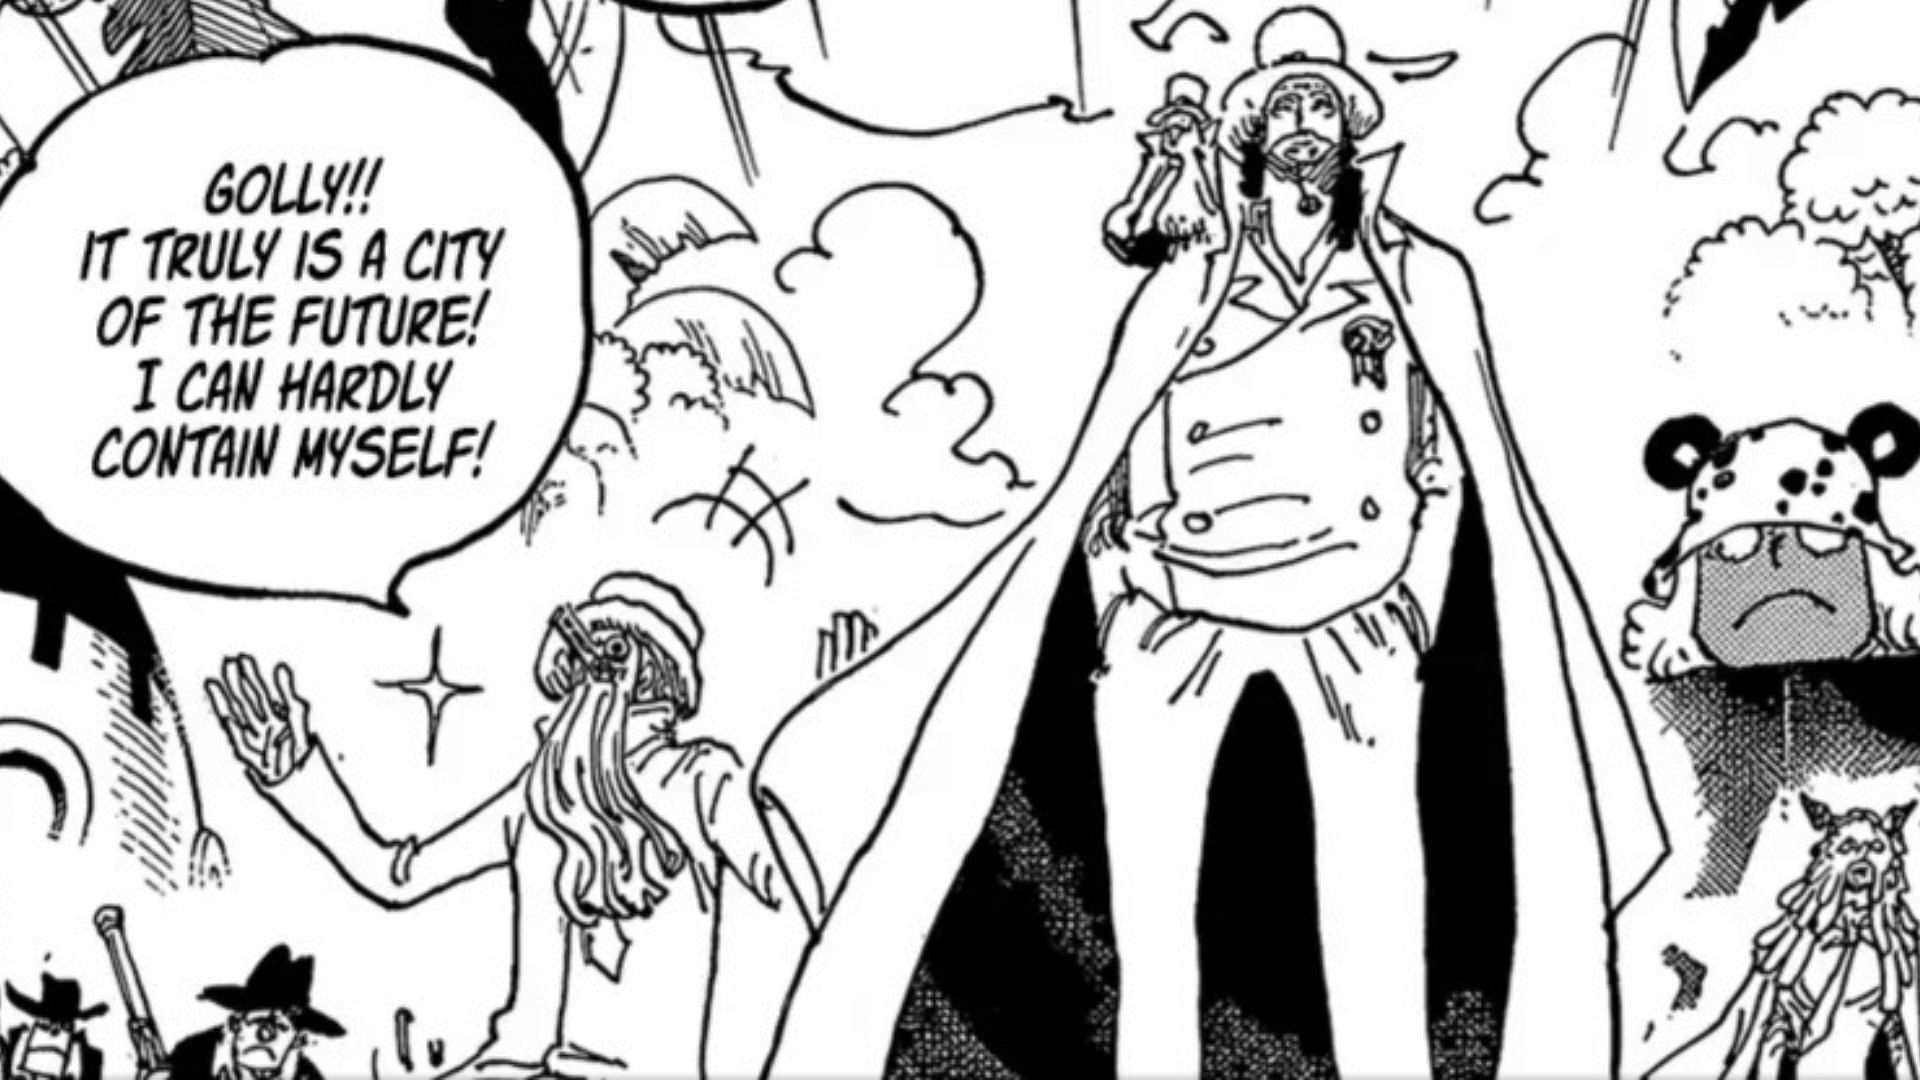 One Piece Chapter 1069 first spoilers suggest 'Luffy defeats and